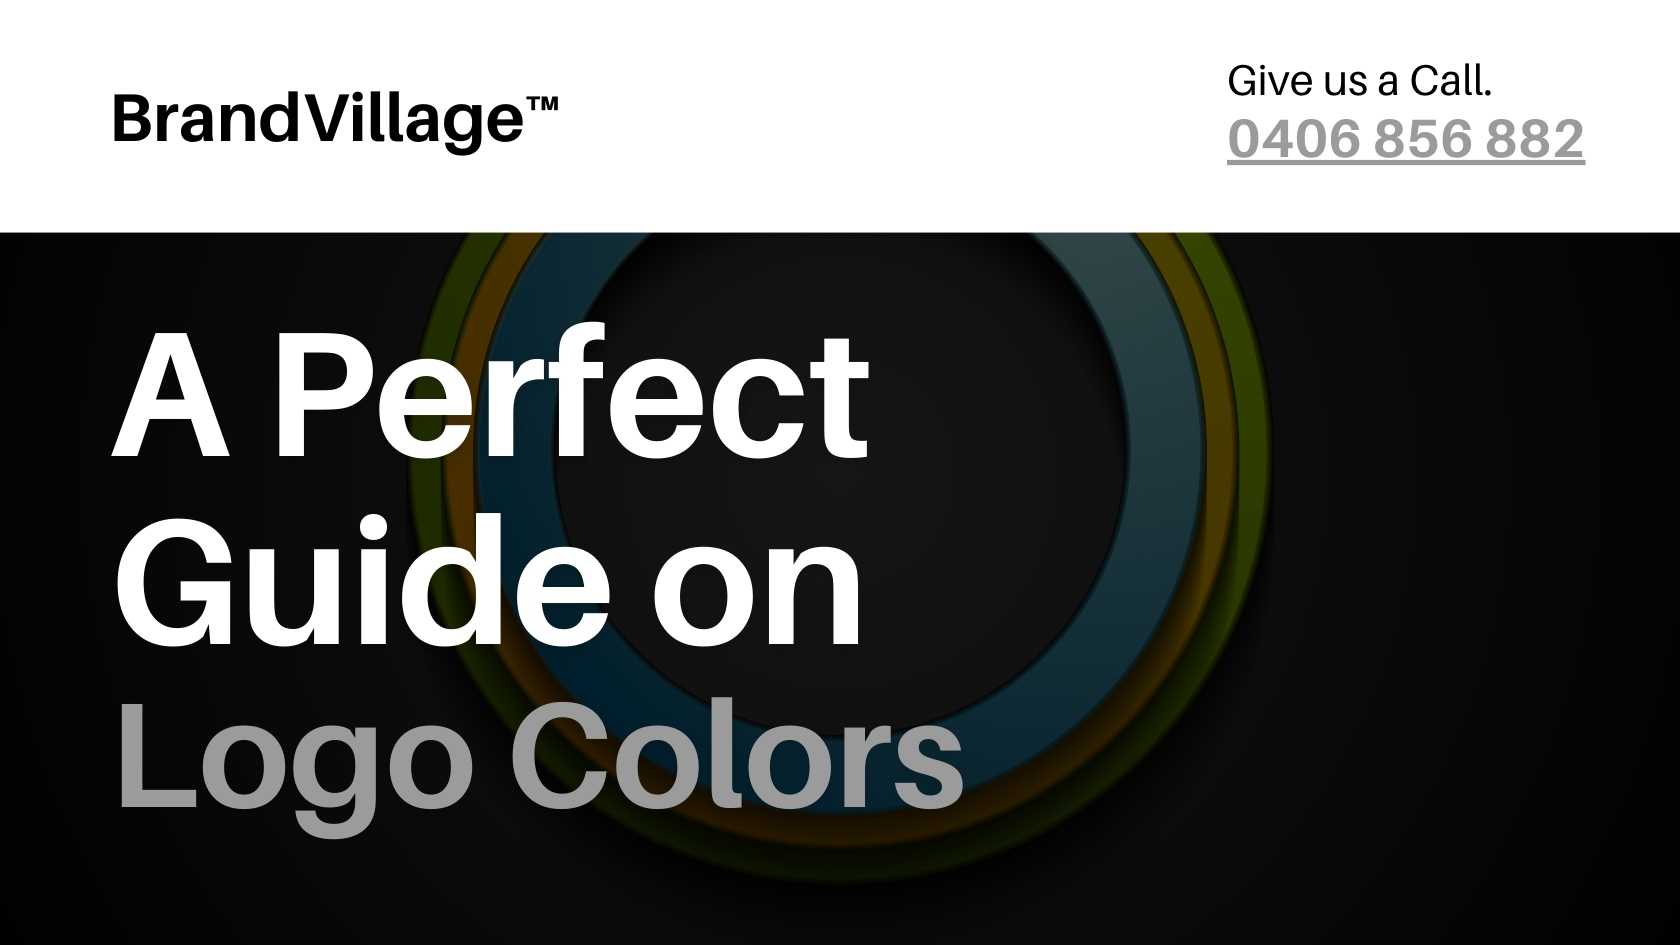 A Perfect Guide on Logo Colors